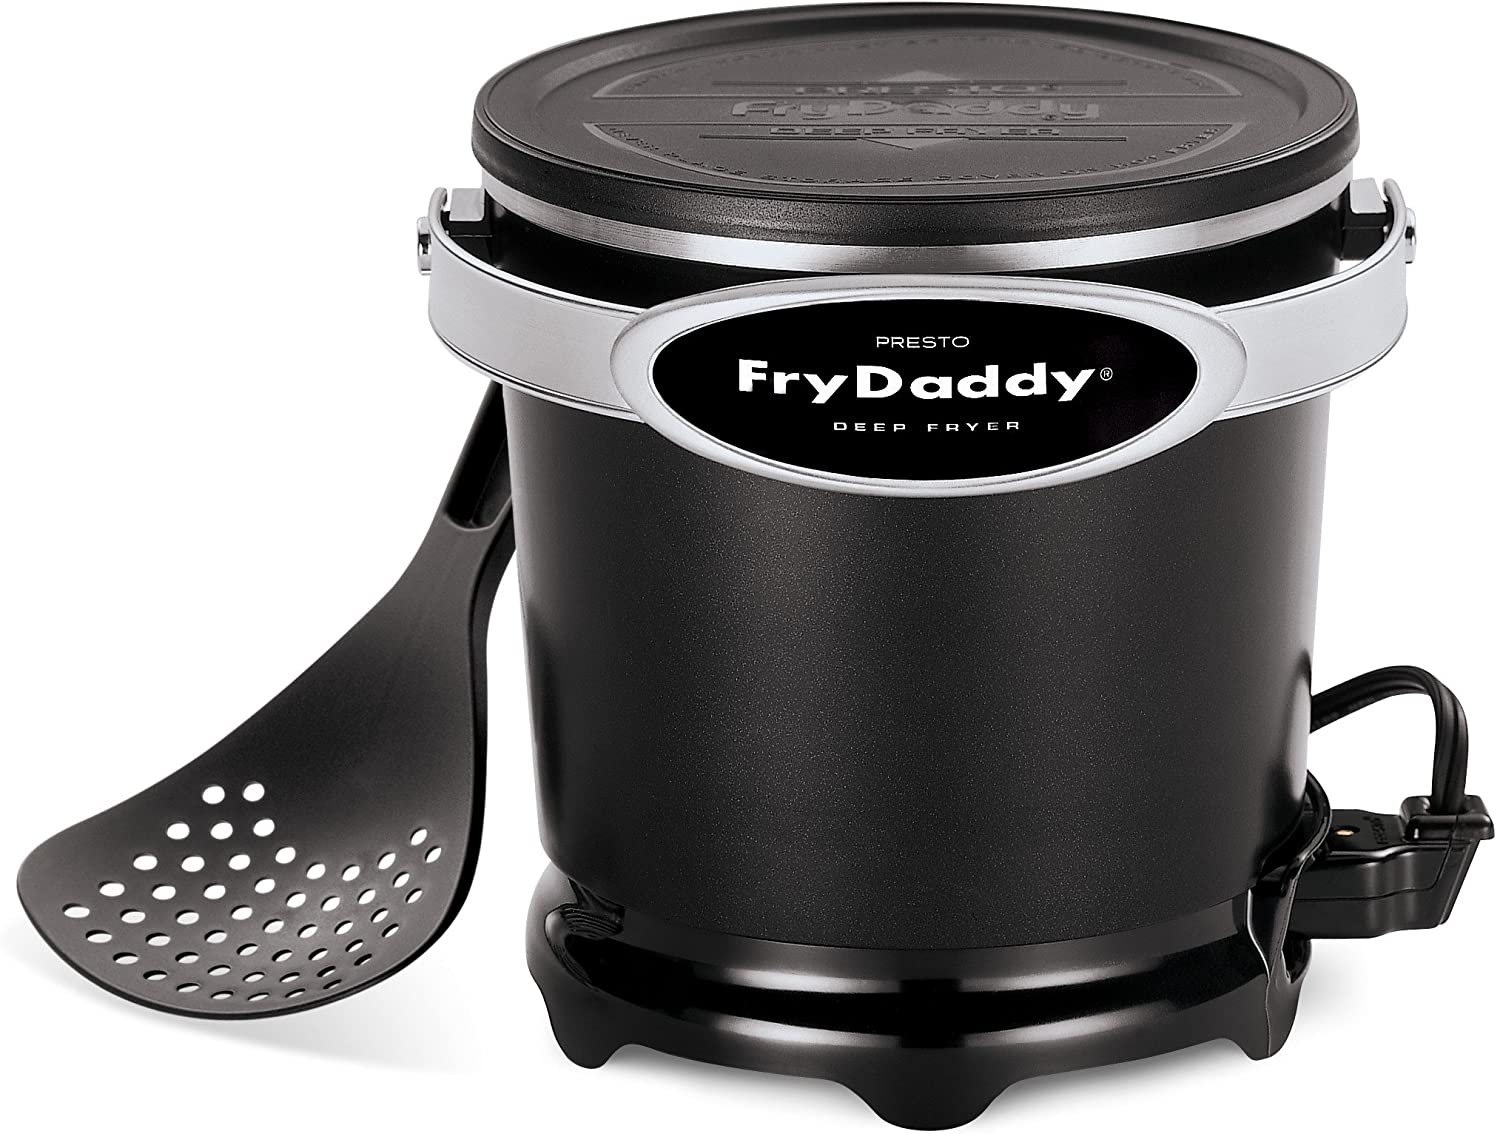 Presto 05420 FryDaddy with cool touch handle, lid and a spoon.